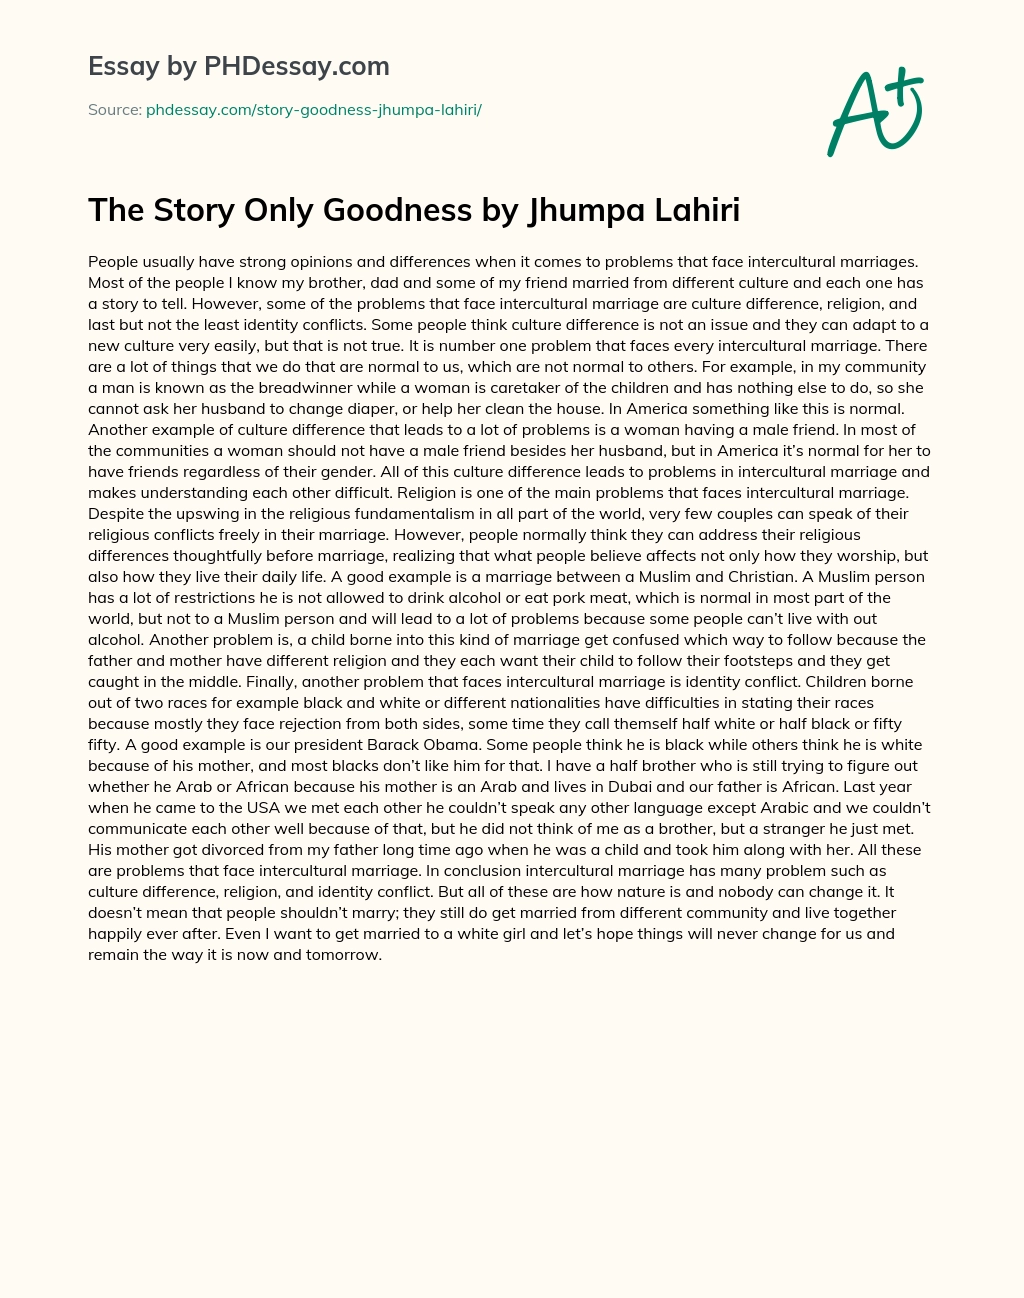 The Story Only Goodness by Jhumpa Lahiri essay